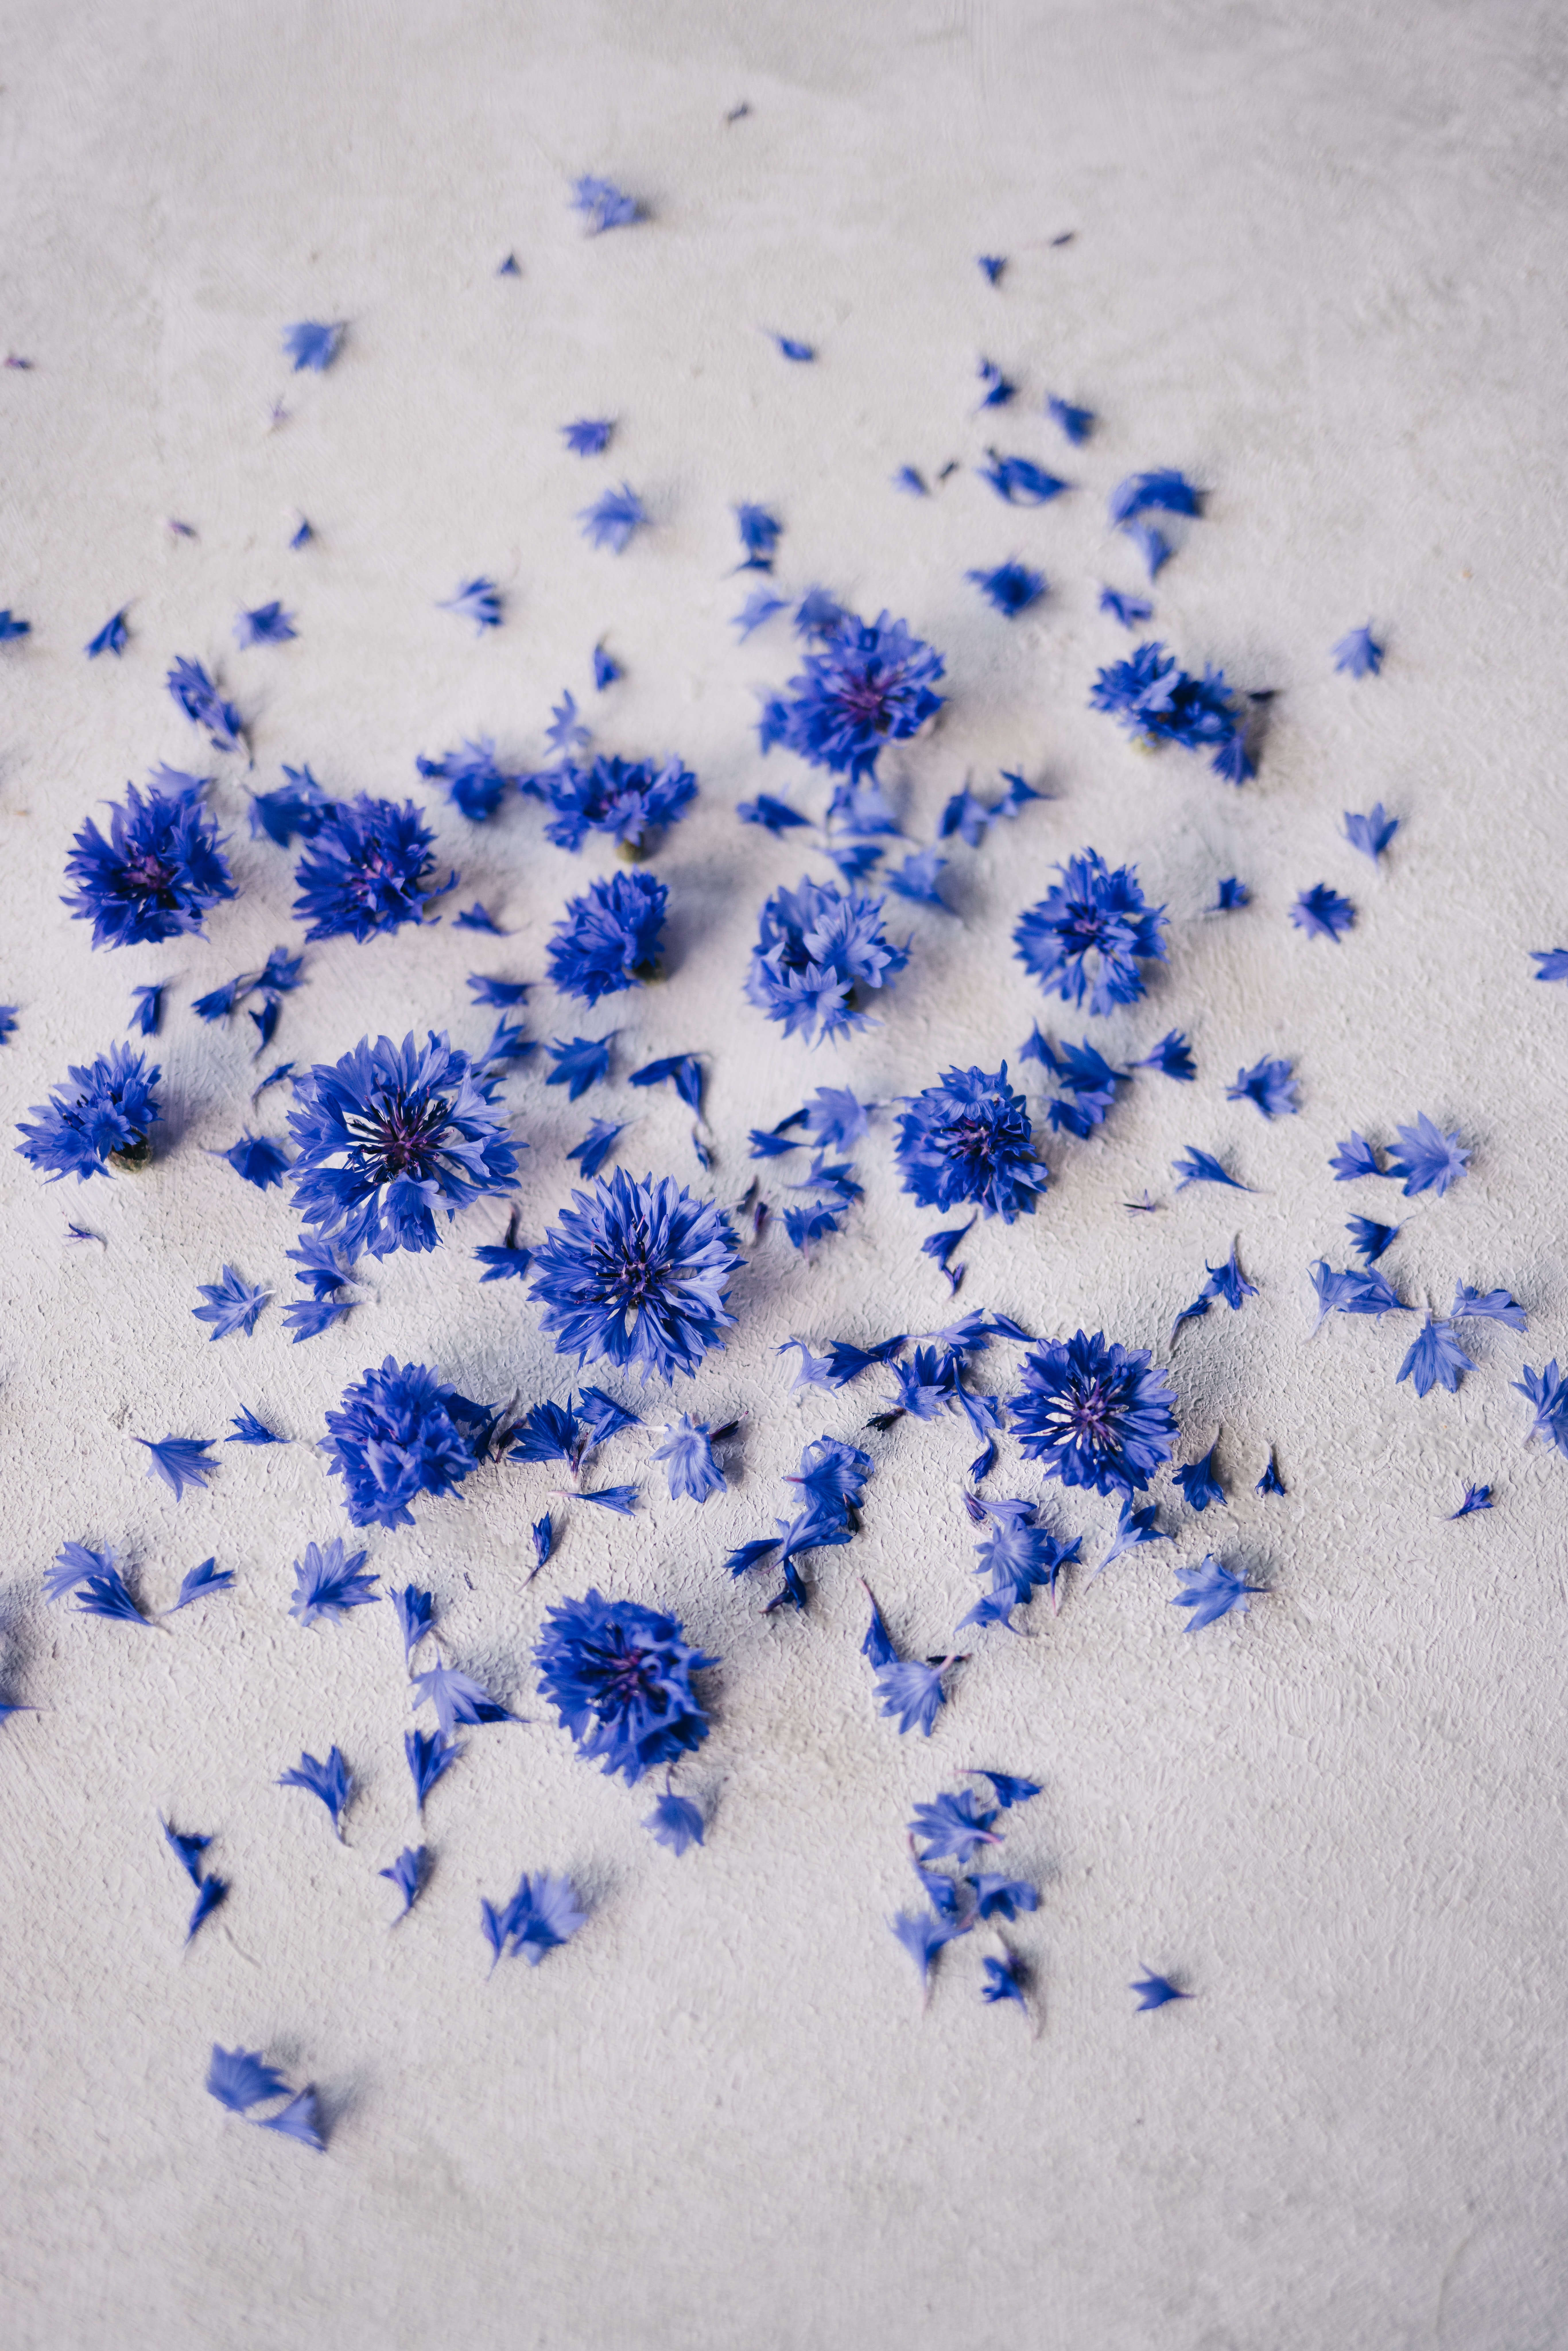 Blue flowers and petals strewn on the floor | Source: Pexels